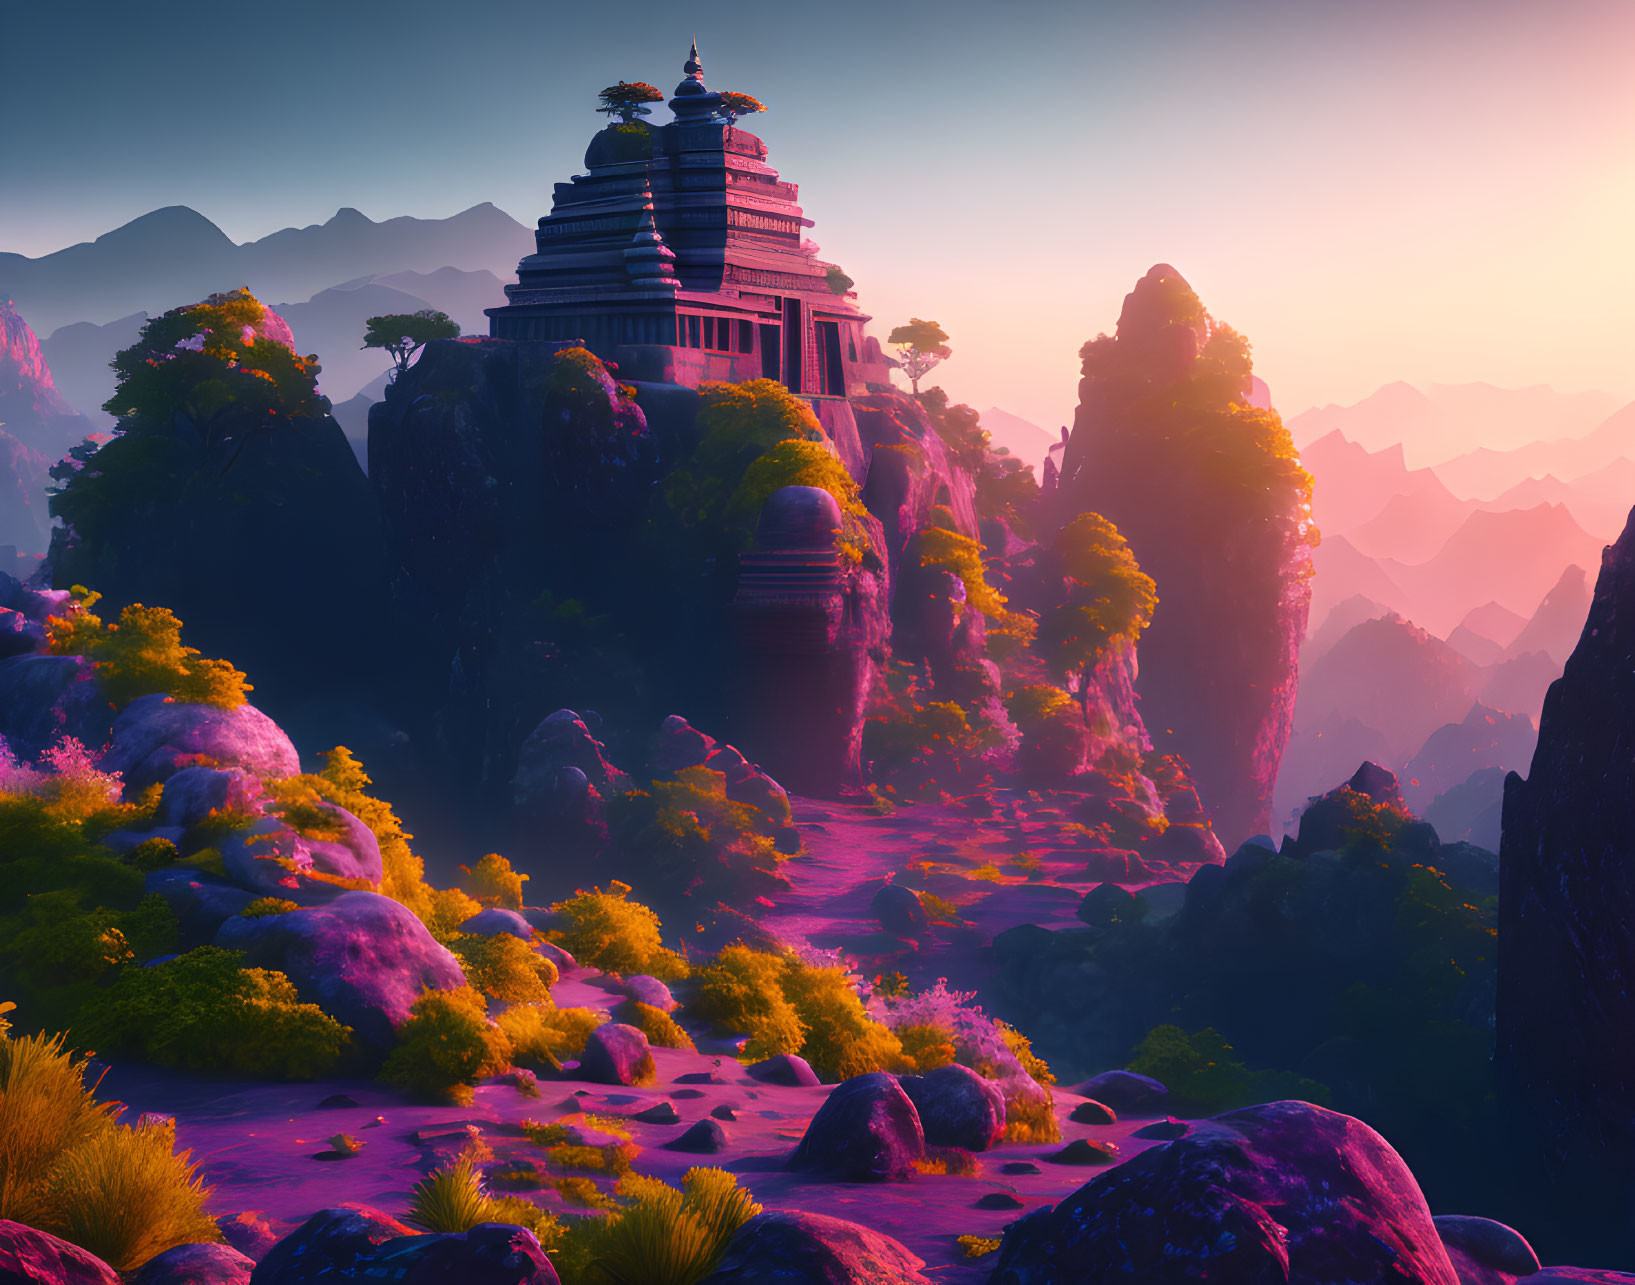 Ancient temple on steep cliff with purple flora under warm hazy sky